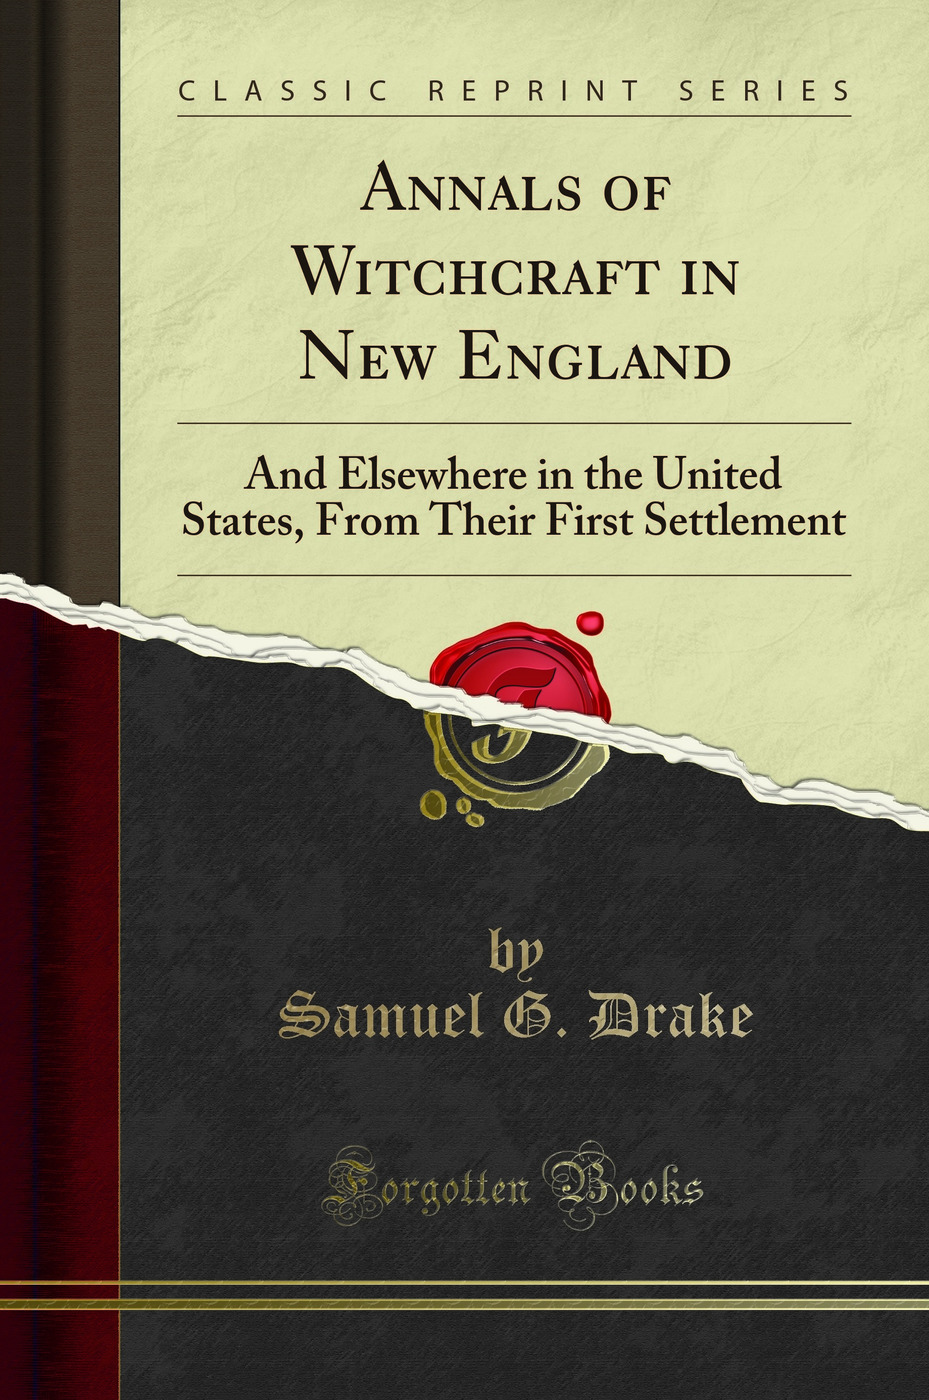 Annals of Witchcraft in New England: And Elsewhere in the United States - Samuel G. Drake